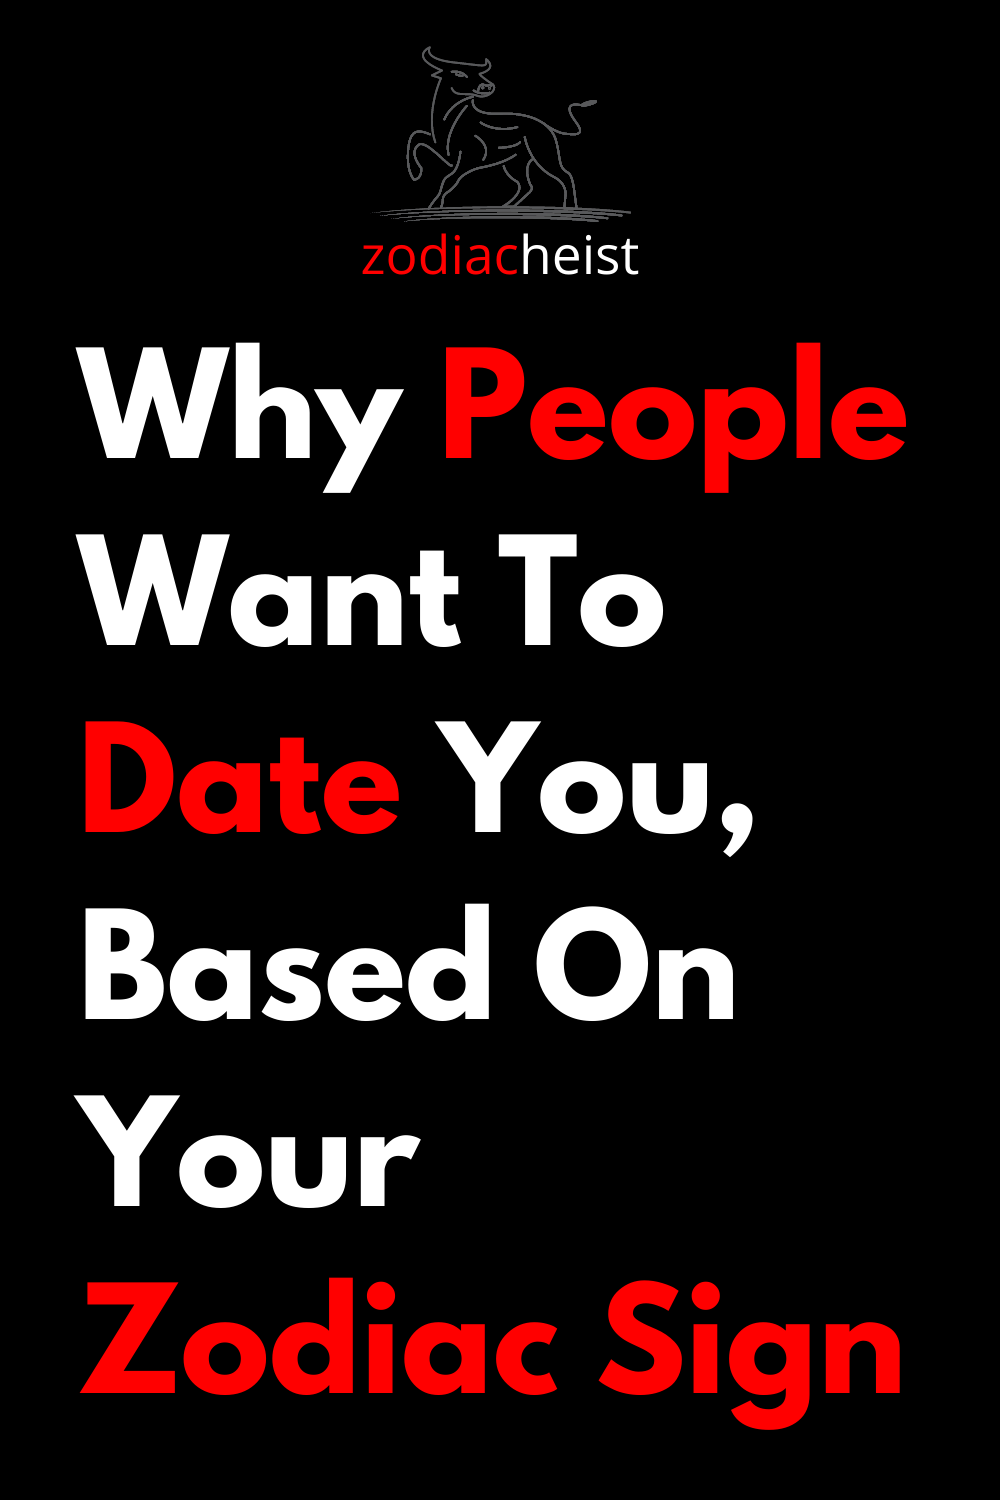 Why People Want To Date You, Based On Your Zodiac Sign